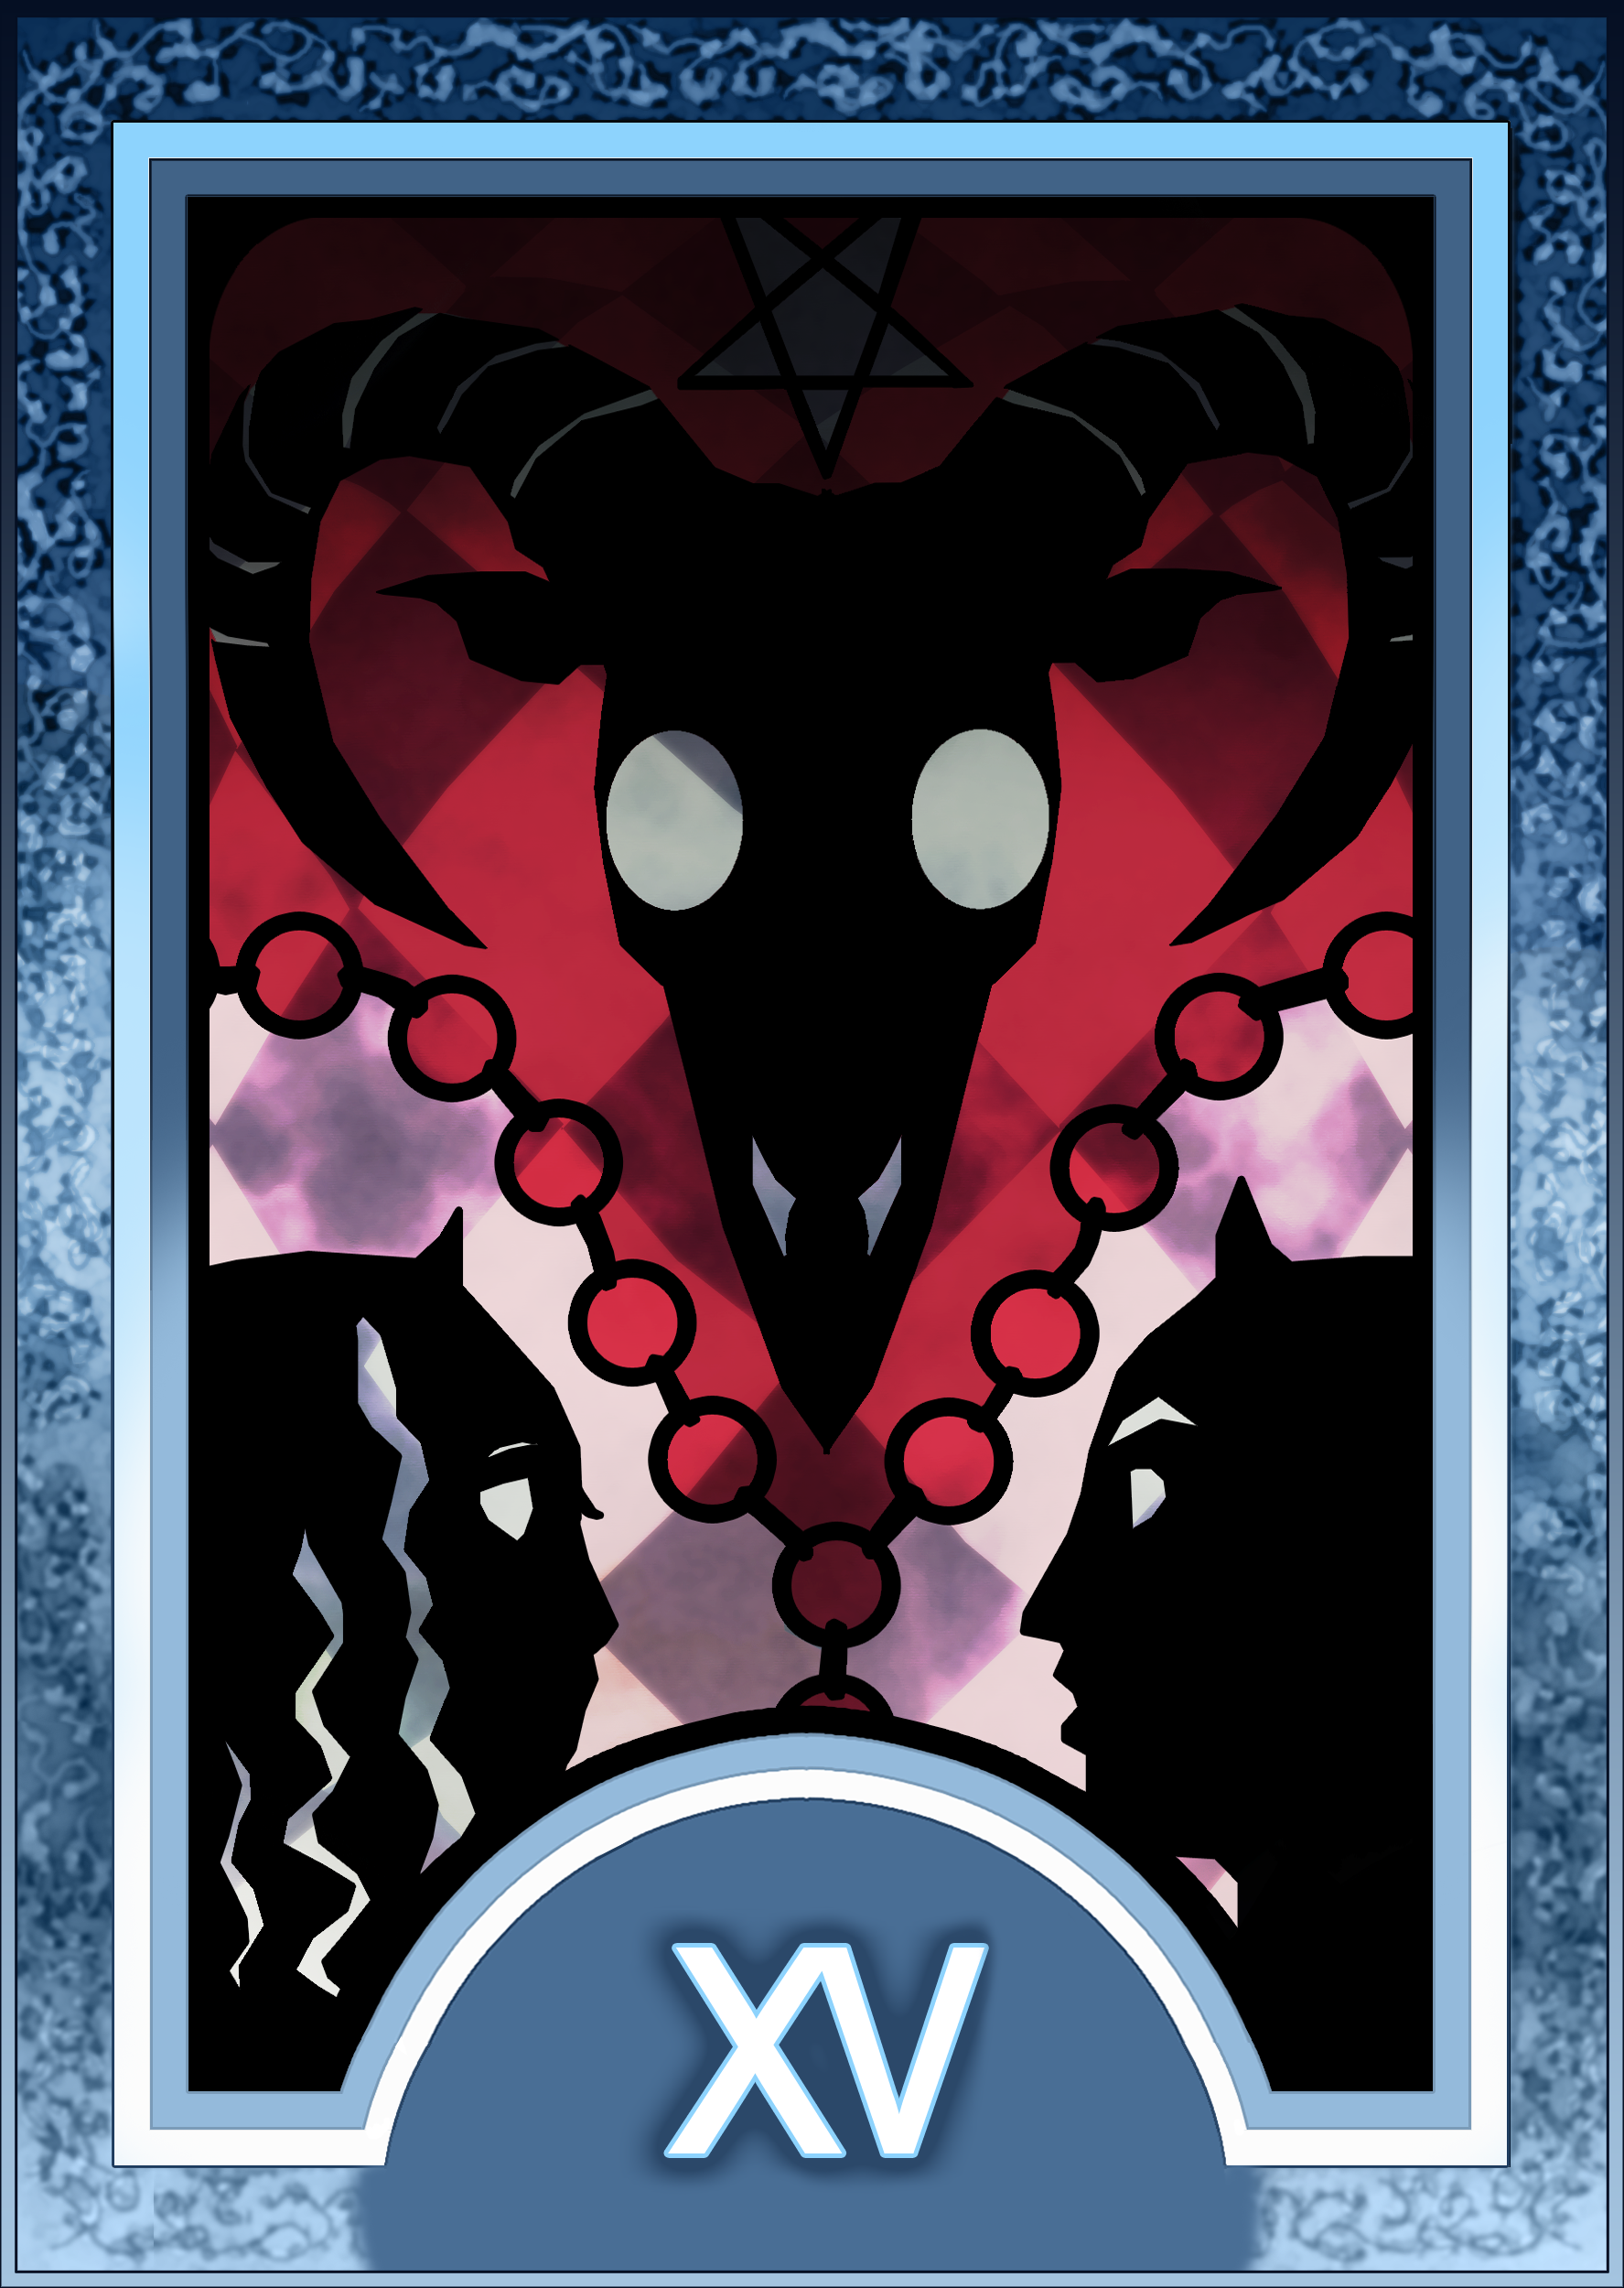 16/10/2018 [Yuri & Gozai] - Page 2 Persona_3_4_tarot_card_deck_hr___the_devil_arcana_by_enetirnel-d6xr6ic